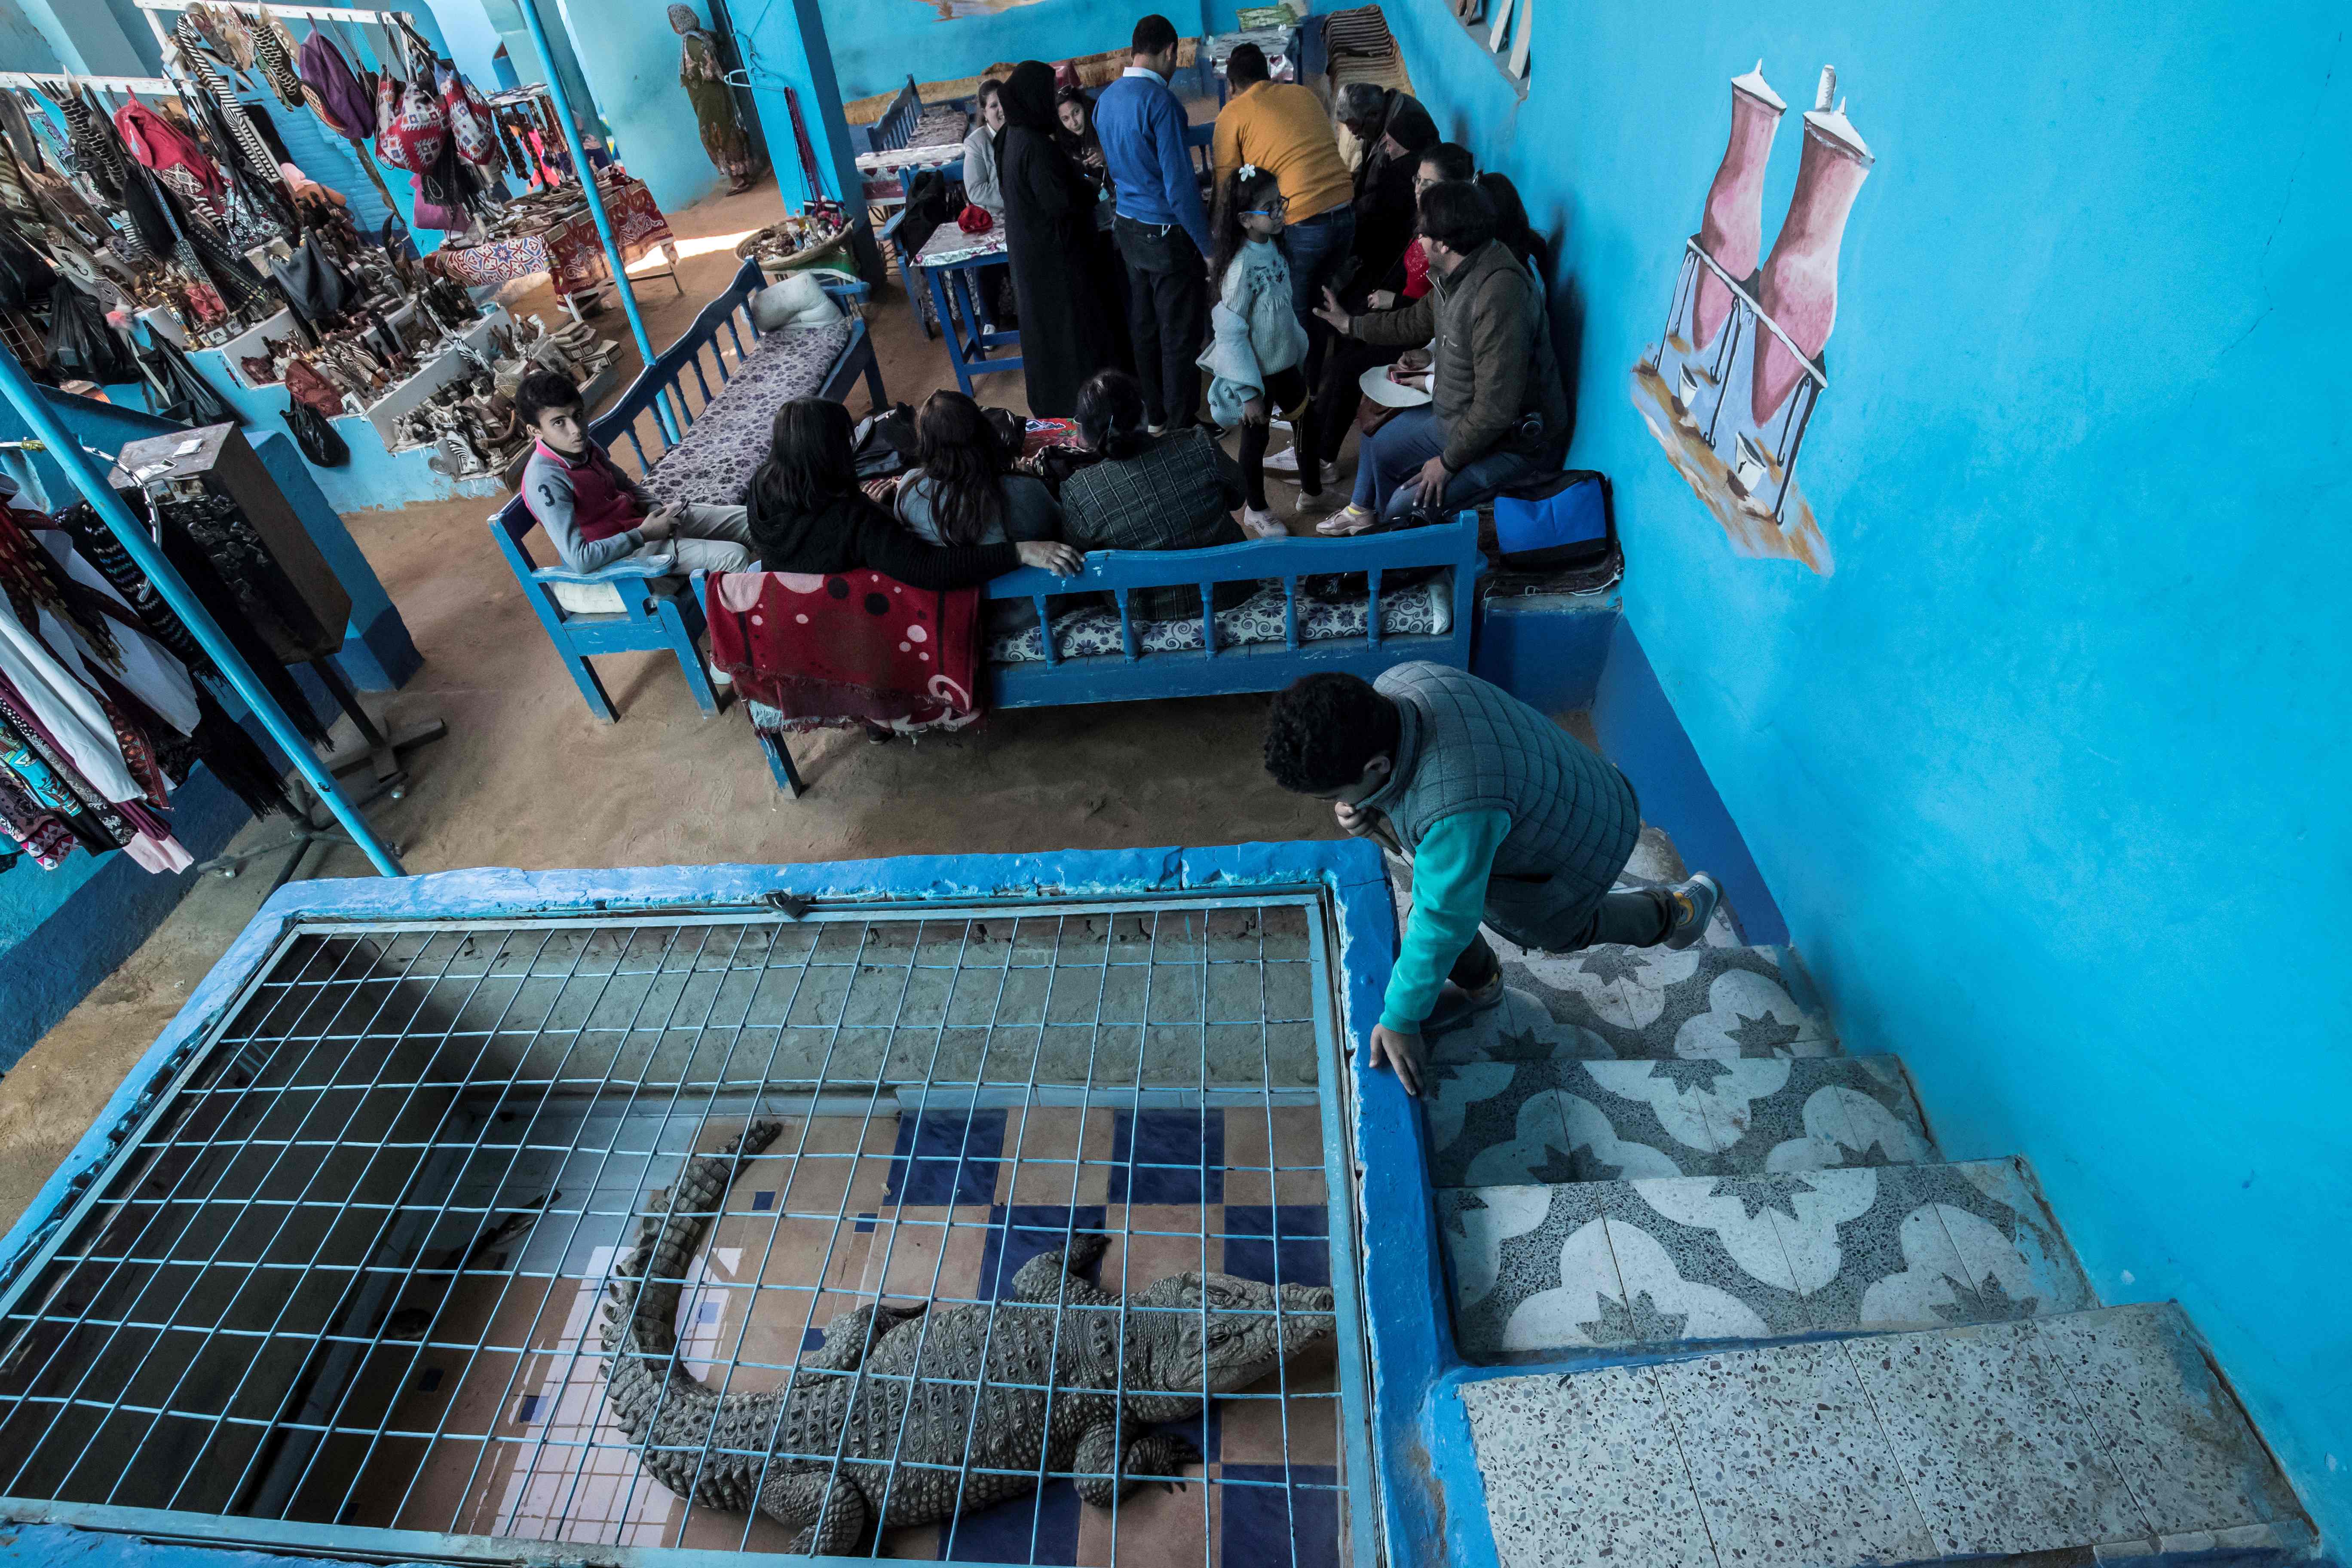 Children watch a crocodile kept inside a cage at a house